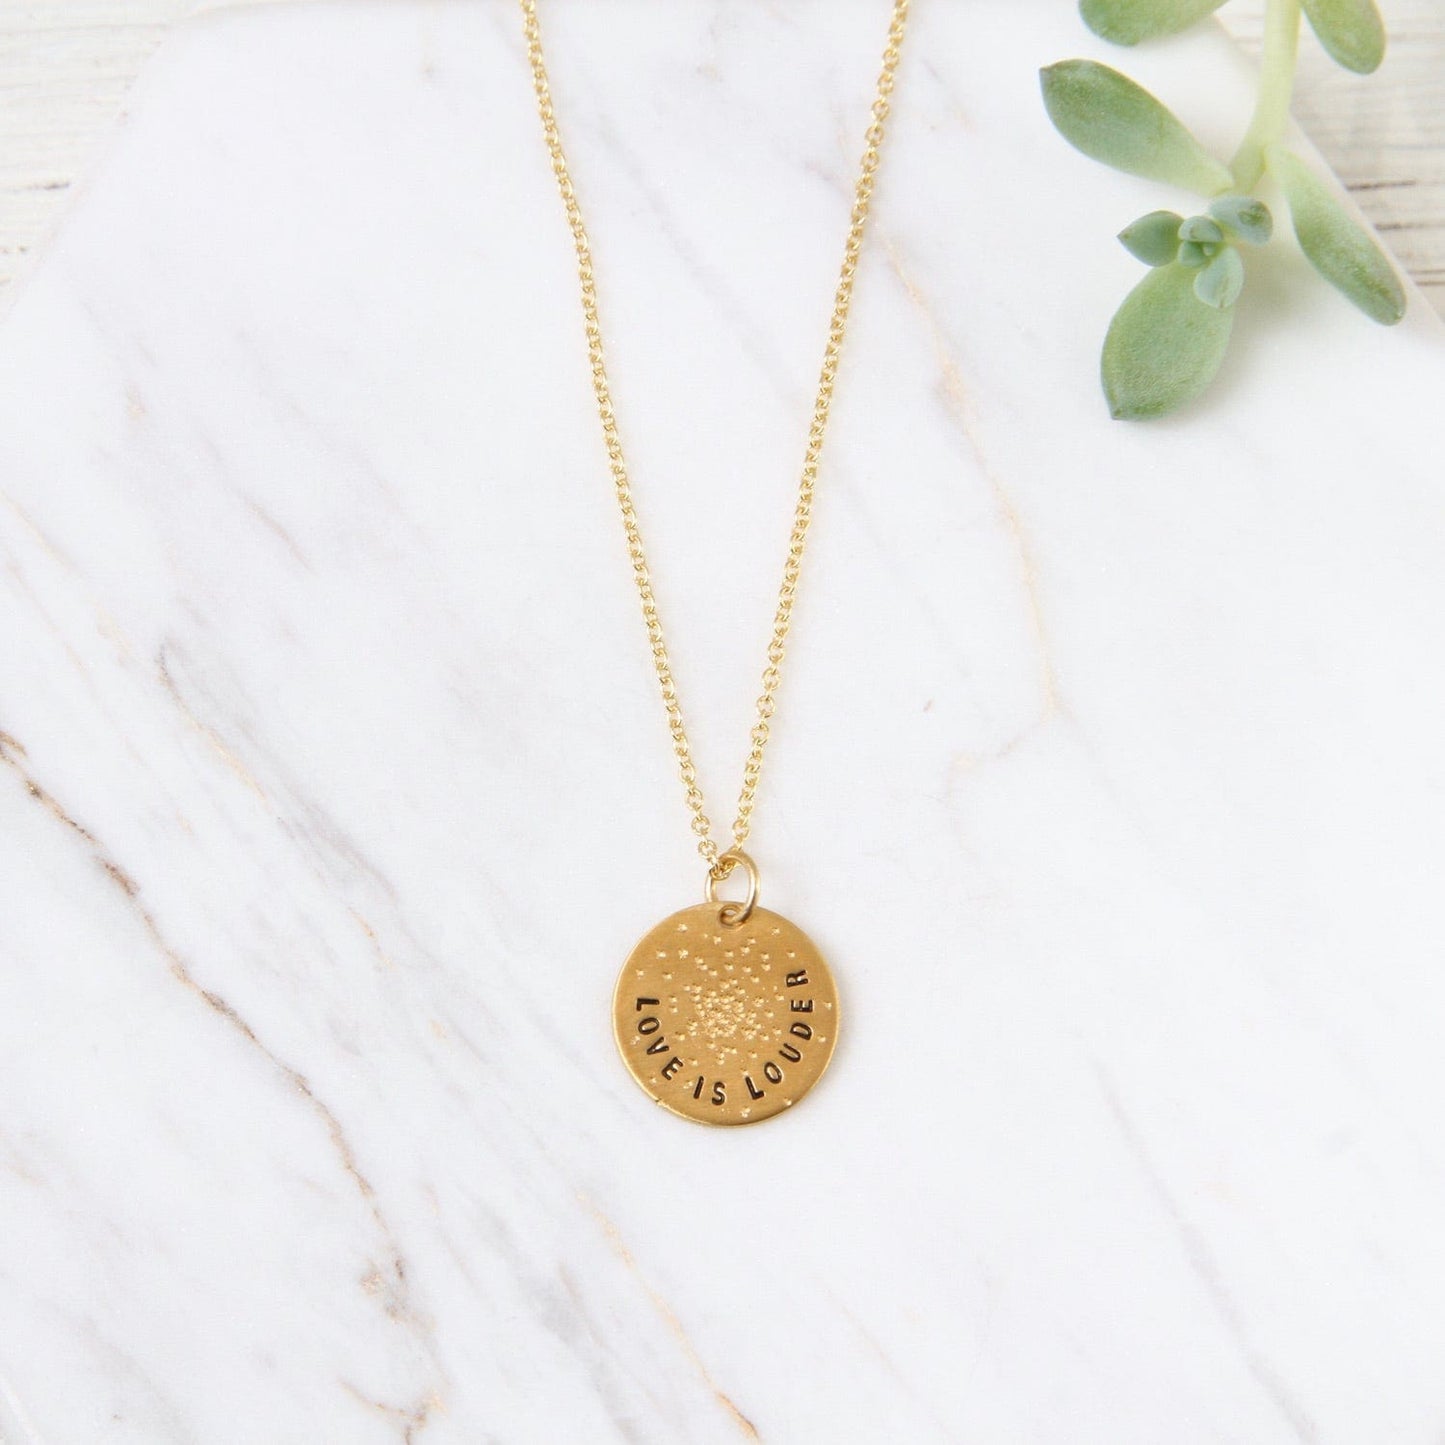 NKL-GPL Diamond Dusted Mini Coin Necklace - "Love is Louder"